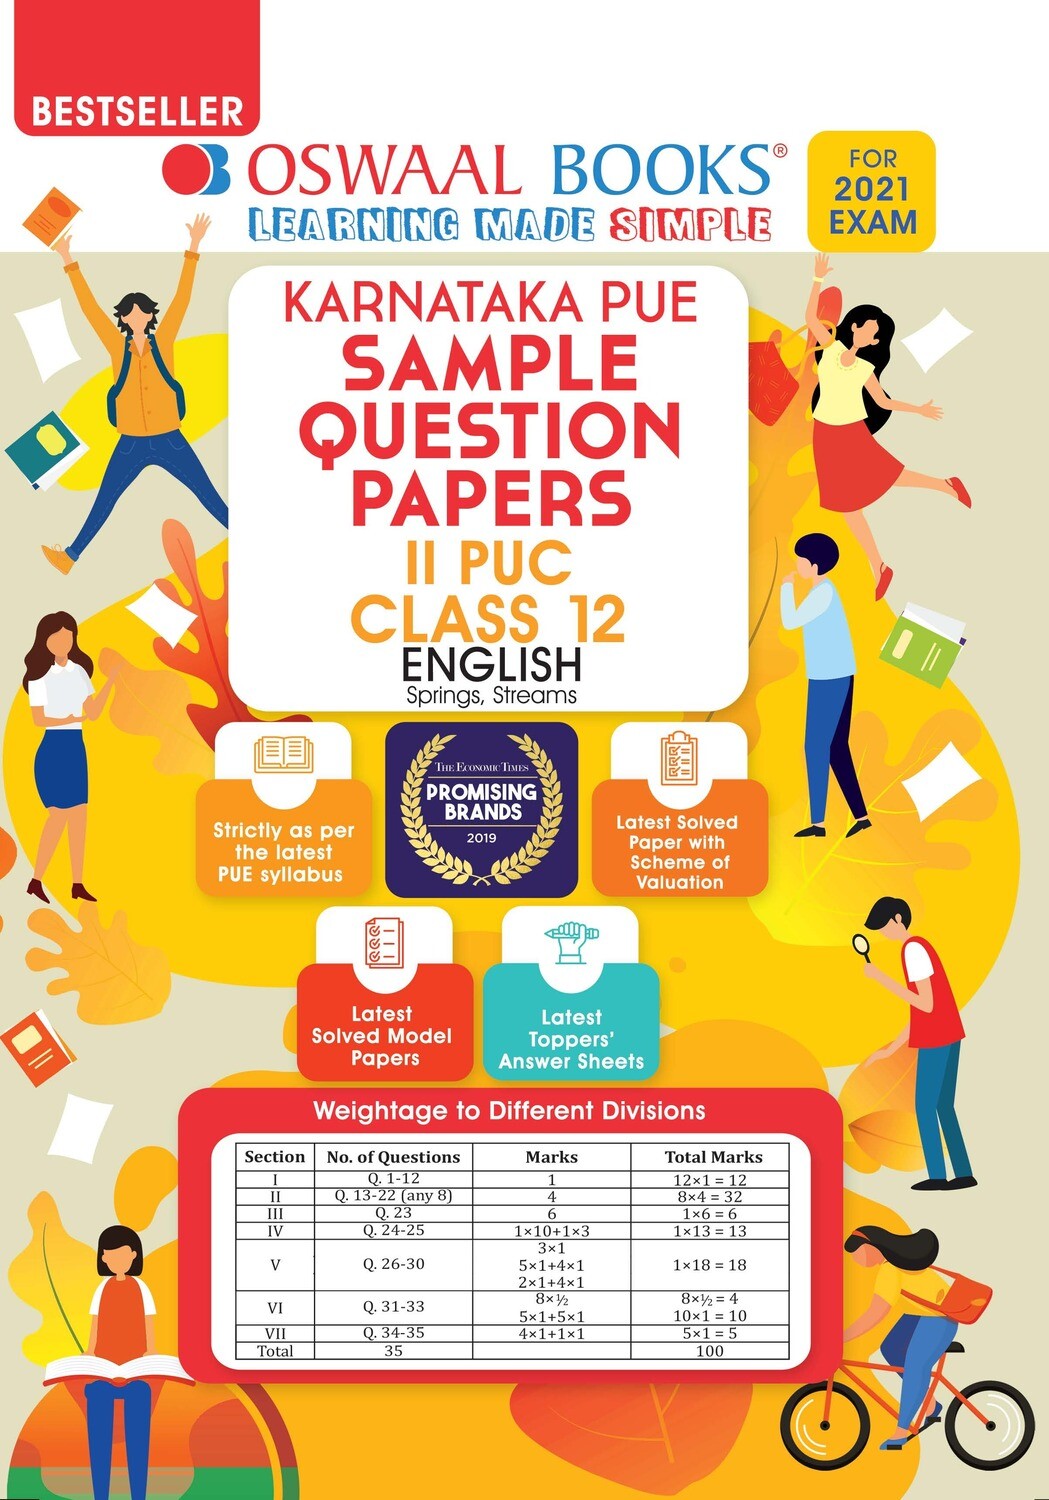 Buy e-book: Oswaal Karnataka PUE Sample Question Papers II PUC Class 12 English (For 2021 Exam): 9789390411351